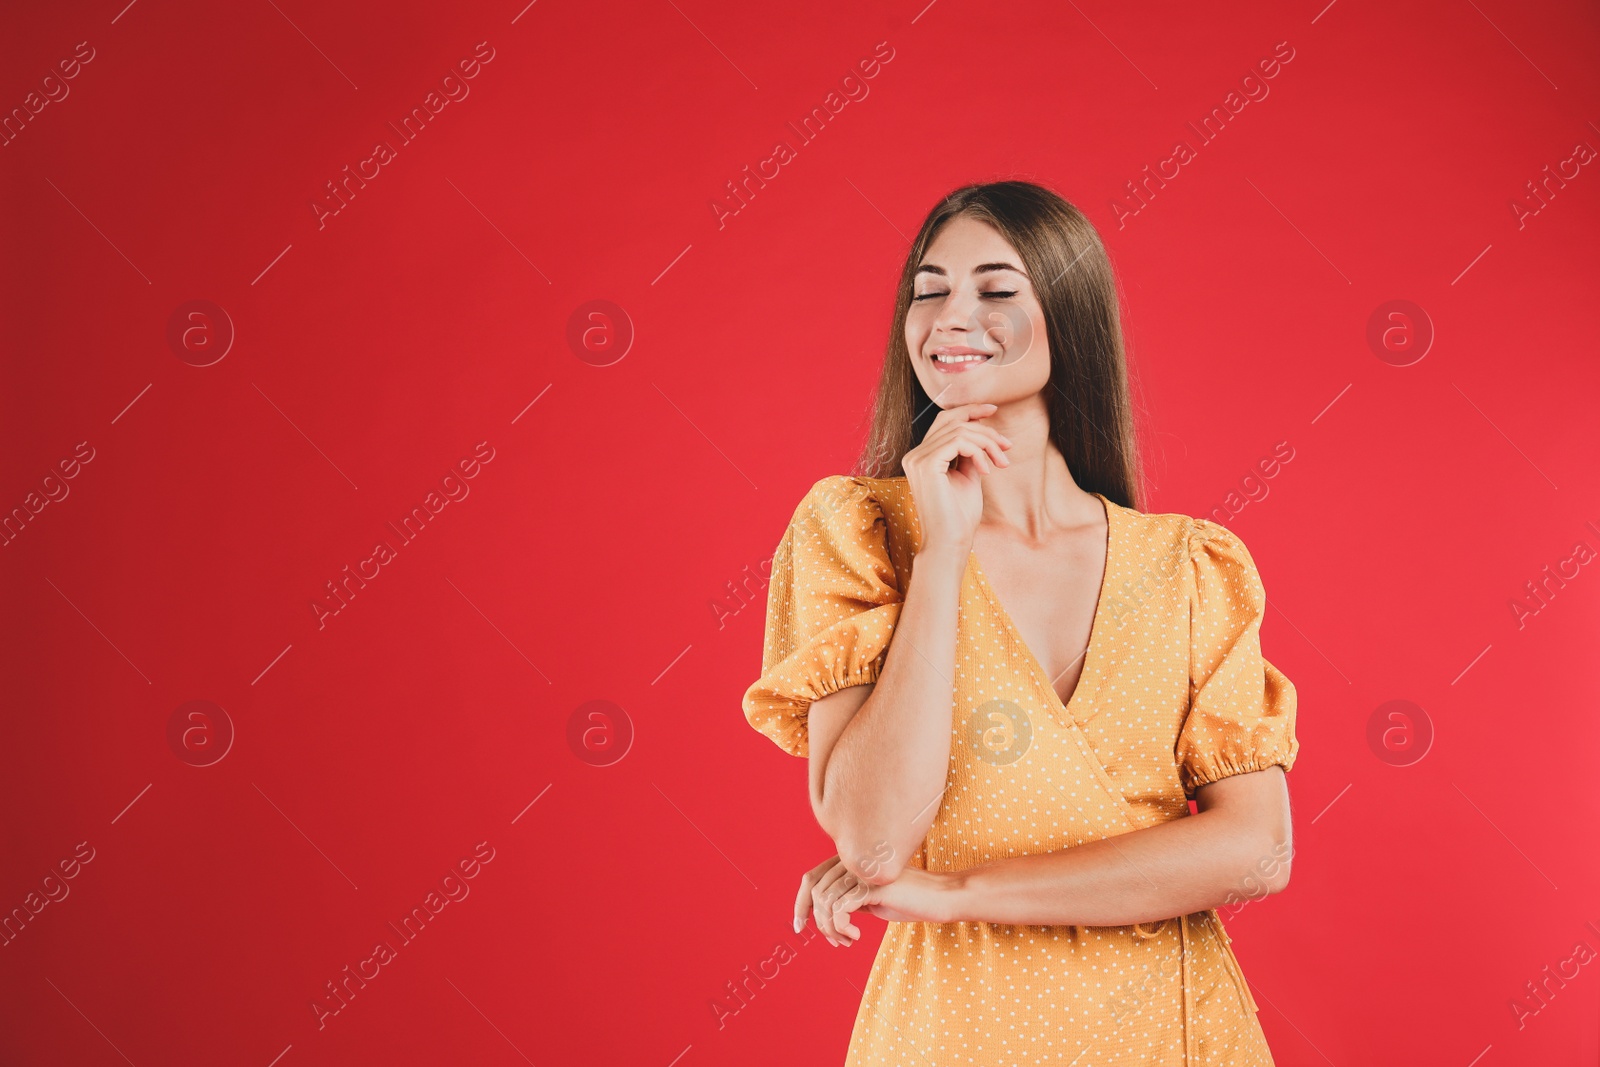 Photo of Young woman wearing stylish yellow dress on red background. Space for text